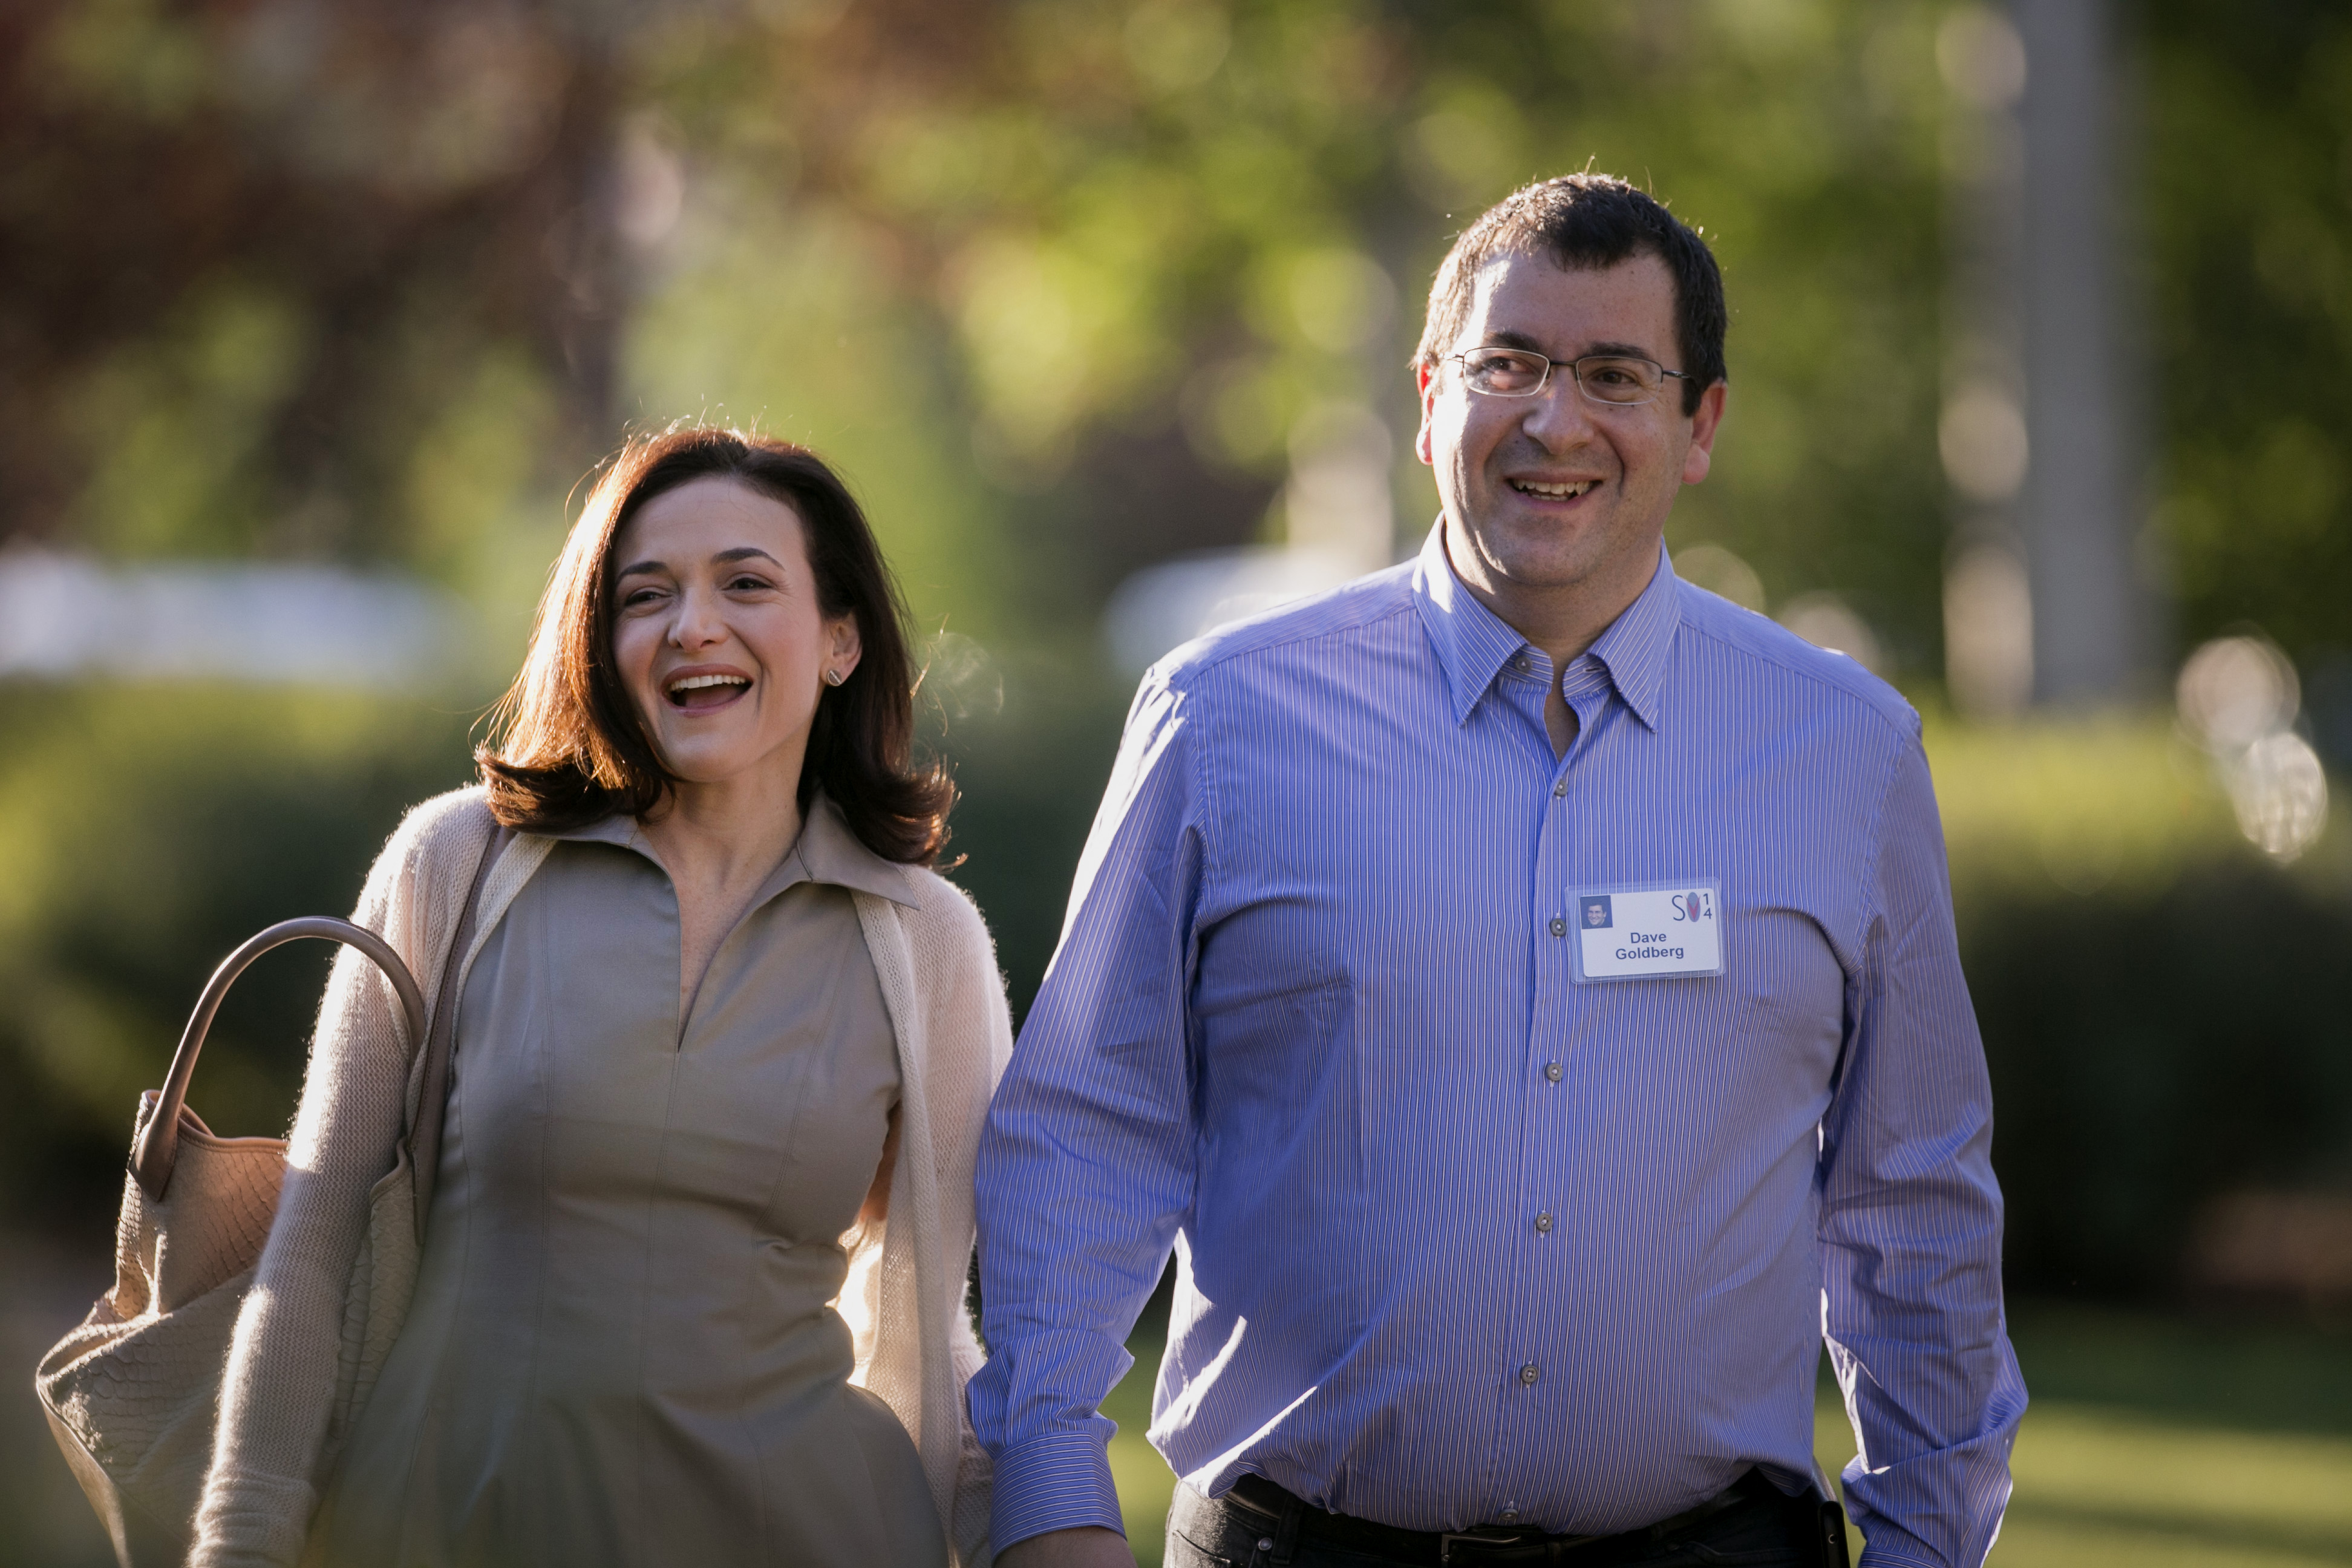 Sheryl Sandberg, chief operating officer of Facebook Inc., left, and her husband David "Dave" Goldberg, chief executive officer of SurveyMonkey, arrive to a morning session at the Sun Valley Lodge during the Allen &amp; Co. Media and Technology Conference in Sun Valley, Idaho, U.S., on Wednesday, July 9, 2014. (Scott Eells—Bloomberg/Getty Images)